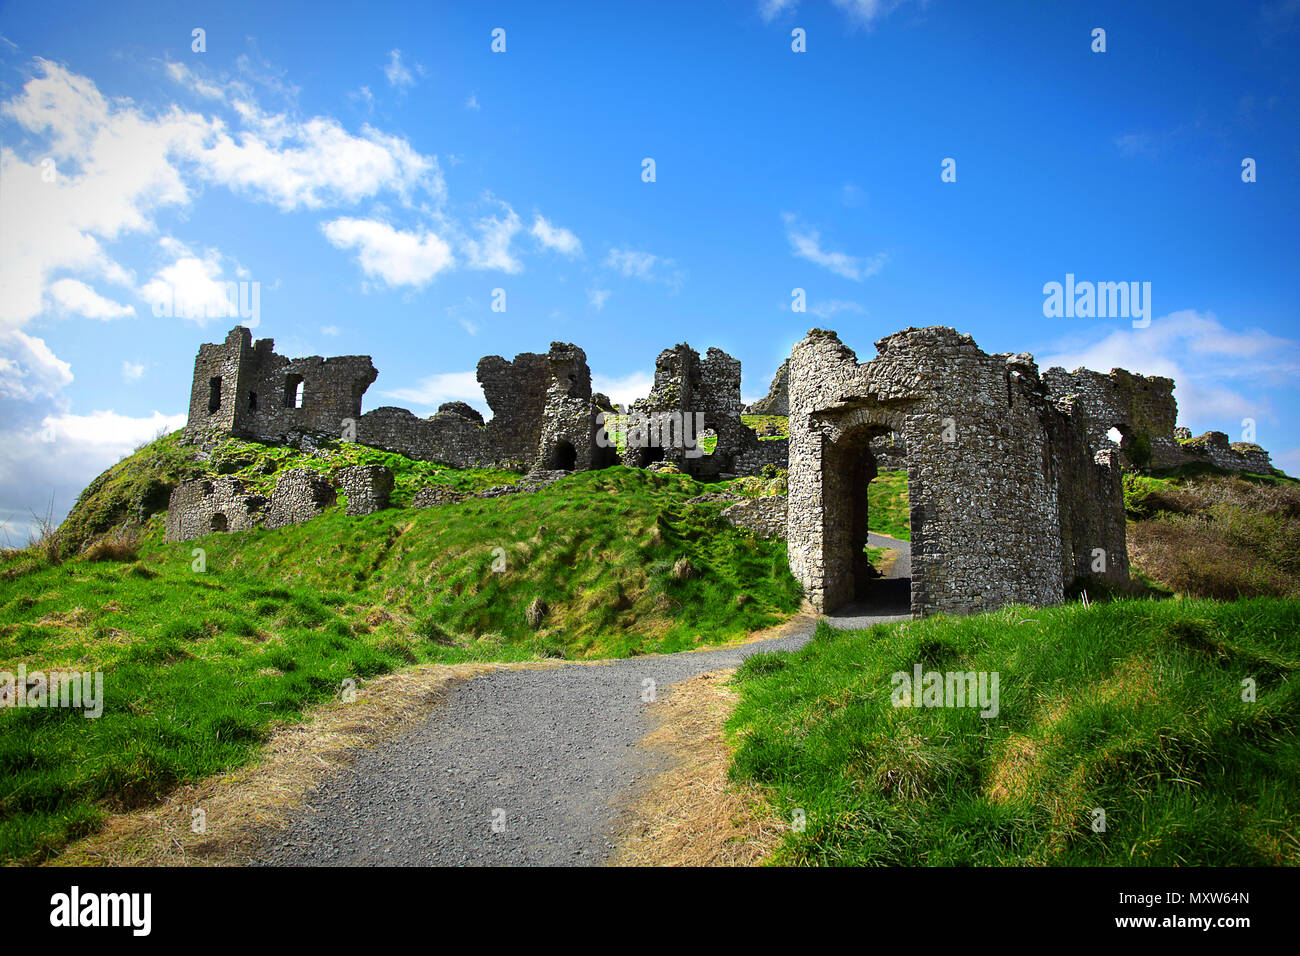 Castle ruins of Rock of Dunamase in County Laois Ireland Stock Photo